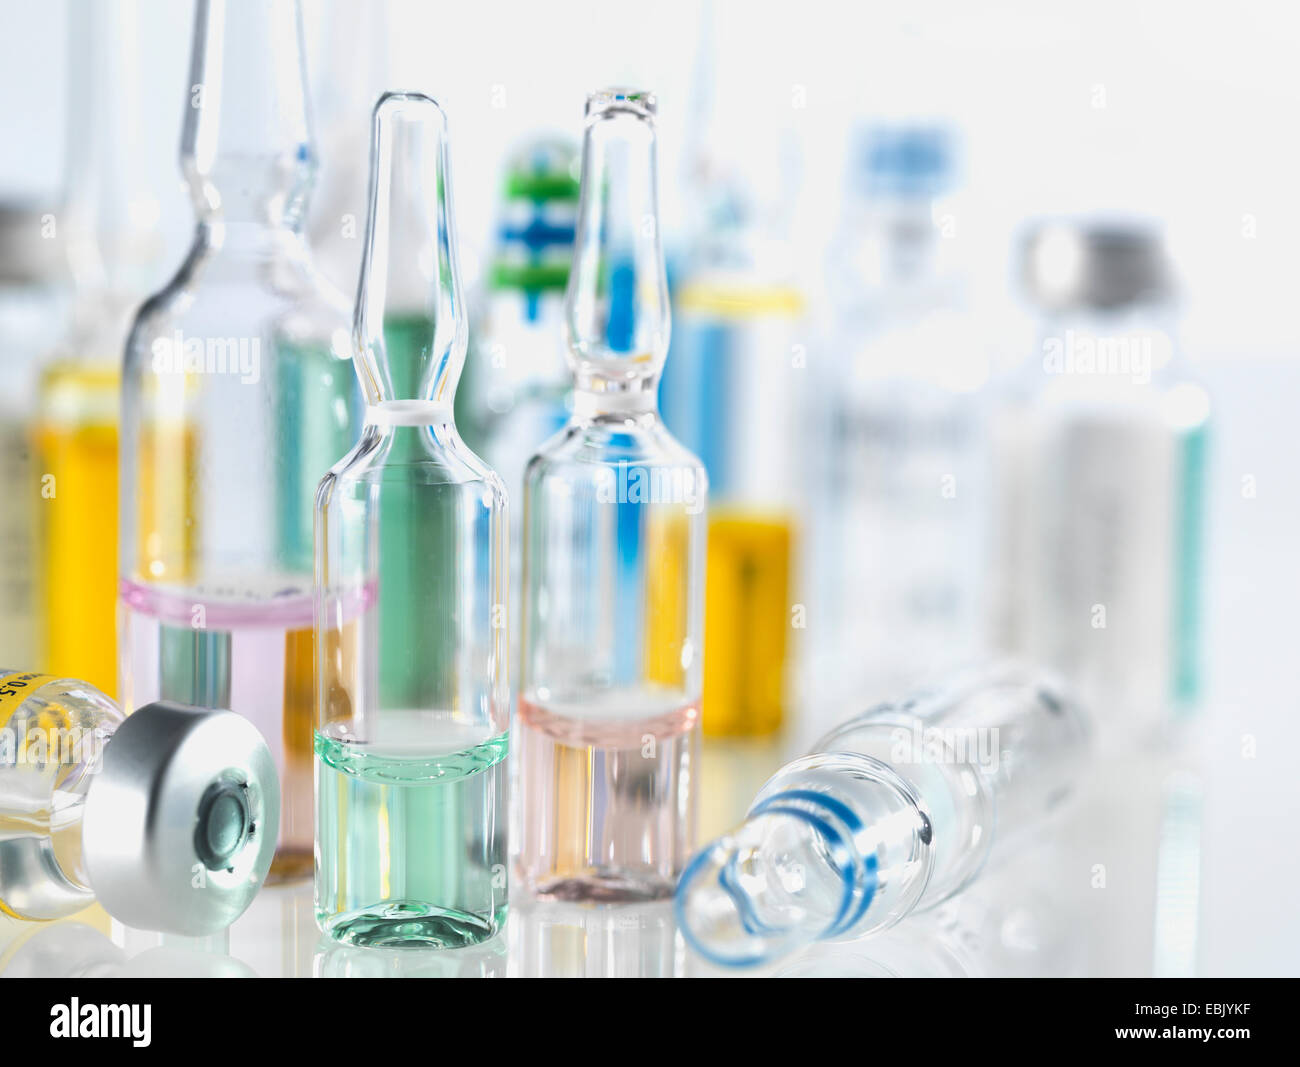 Selection of drugs including vials, ampules and vaccines illustrating medical research Stock Photo